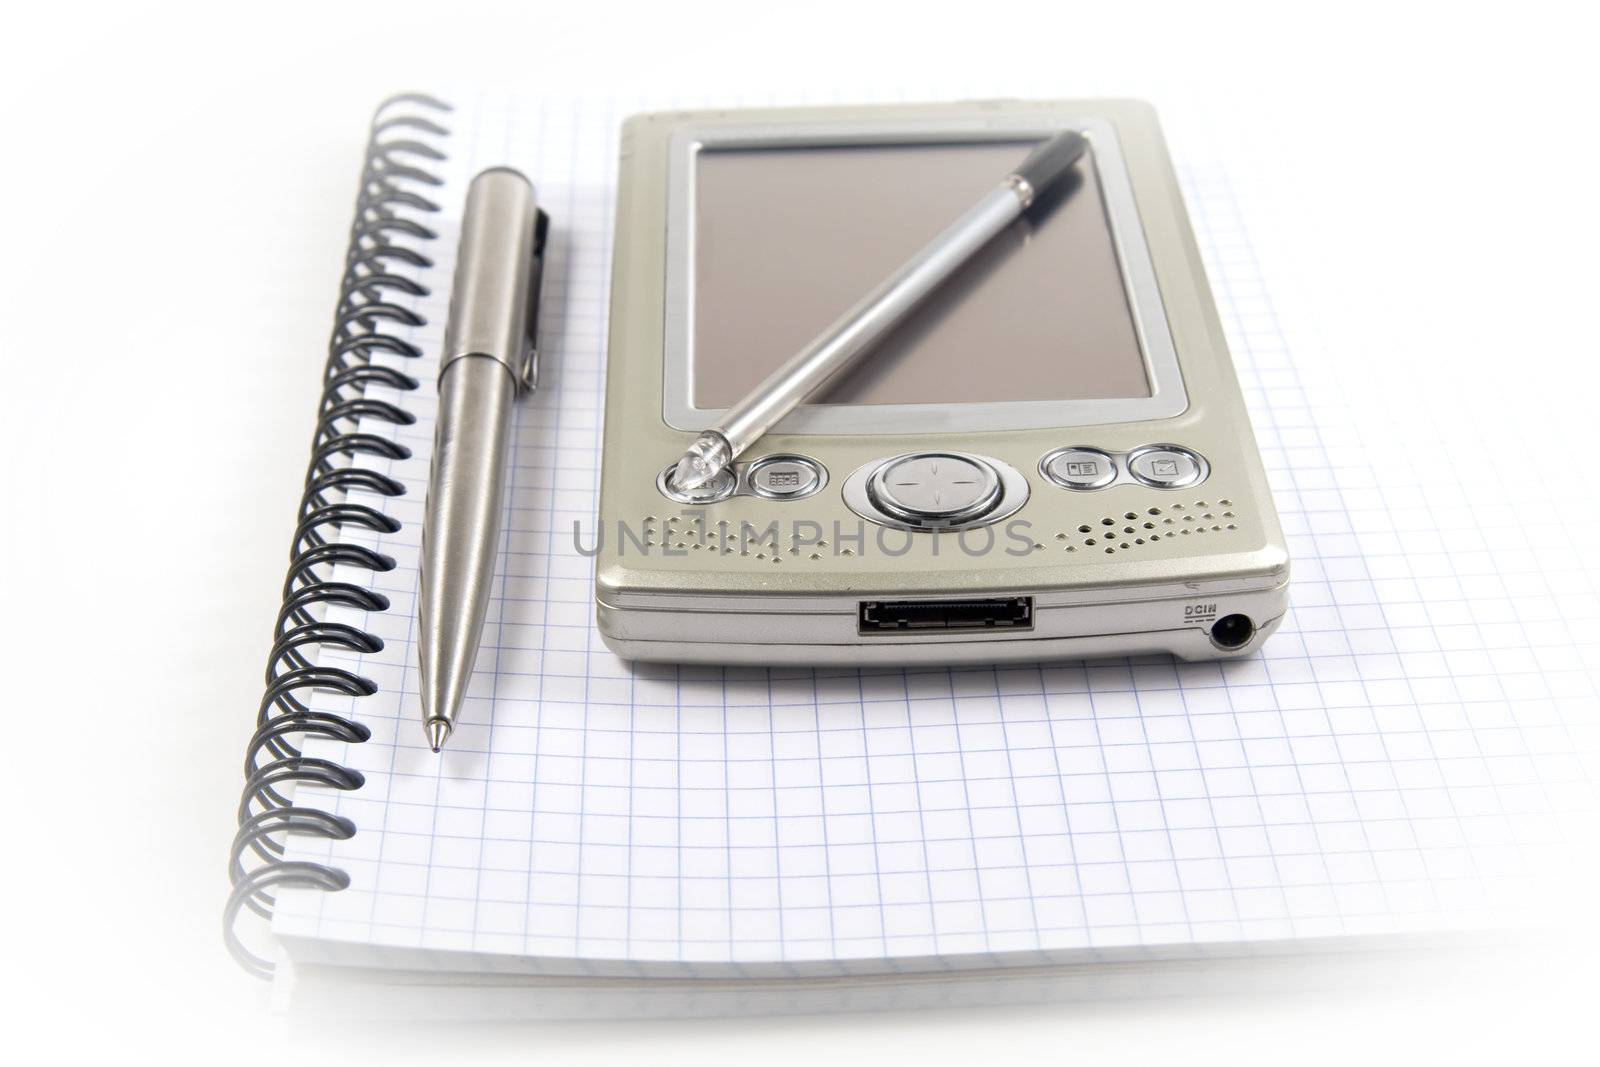 Vignetting image of pen and PDA on spiral notebook